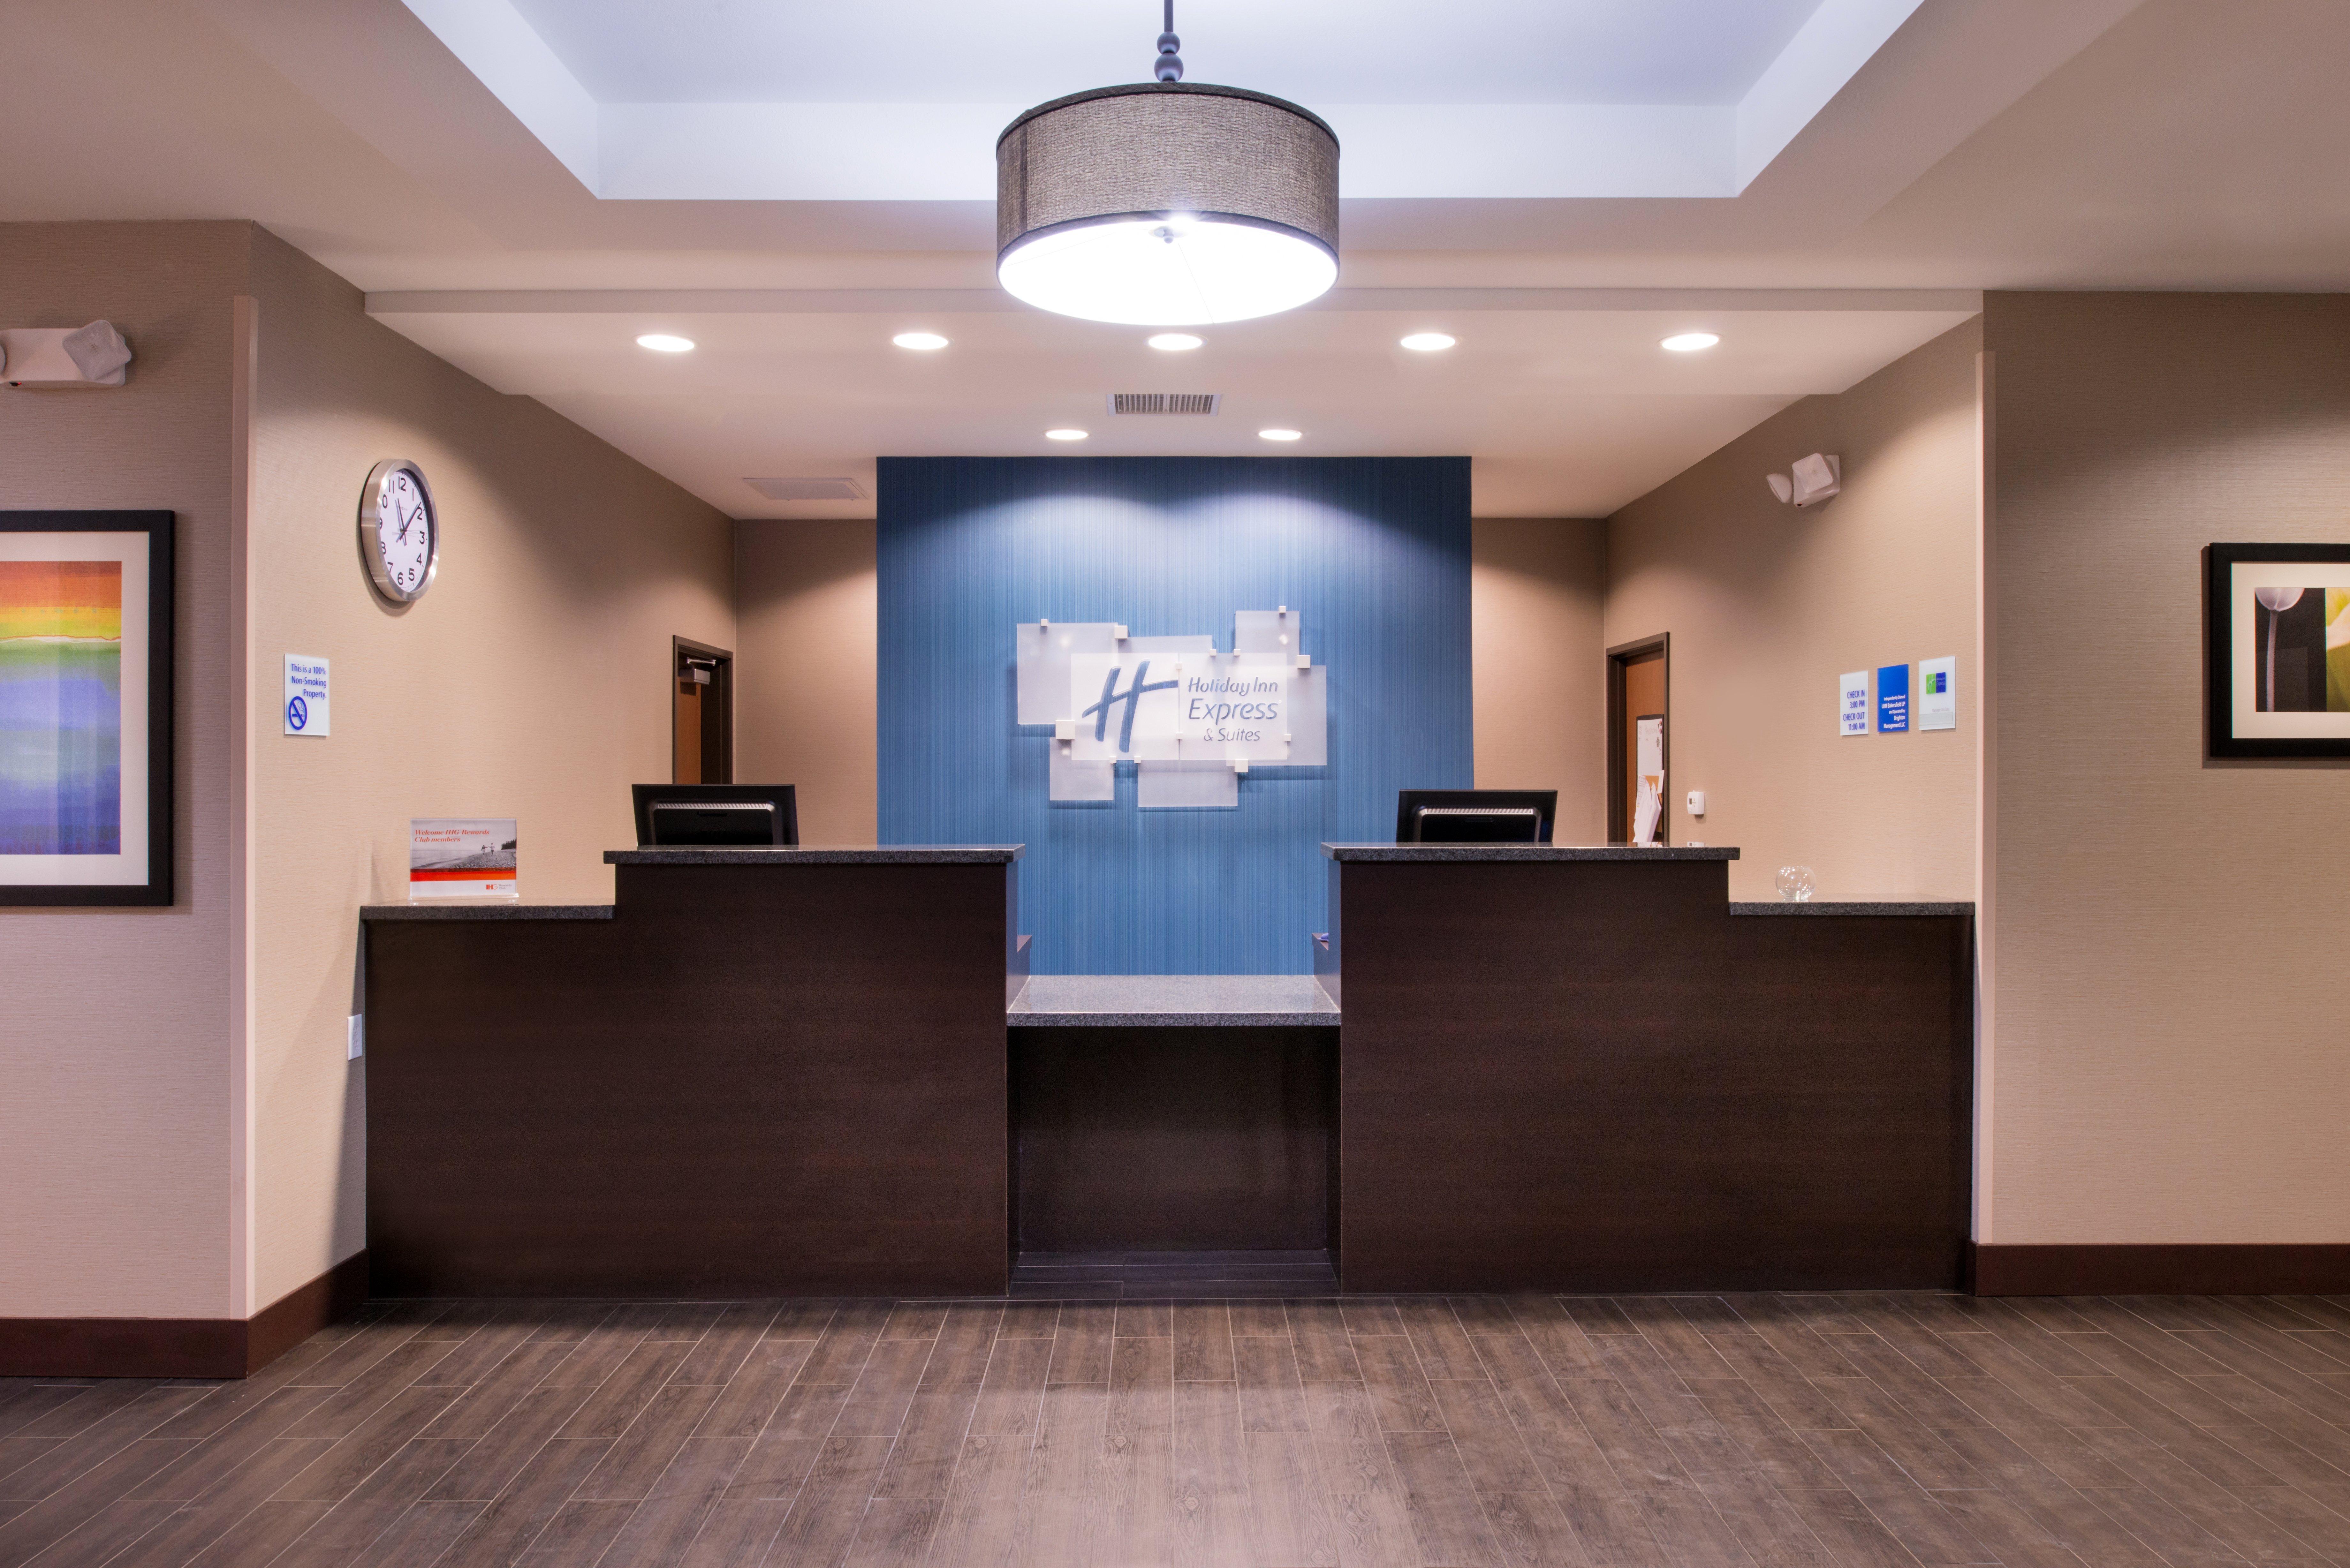 A warm welcome awaits you at our Bakersfield Airport (BFL) hotel!